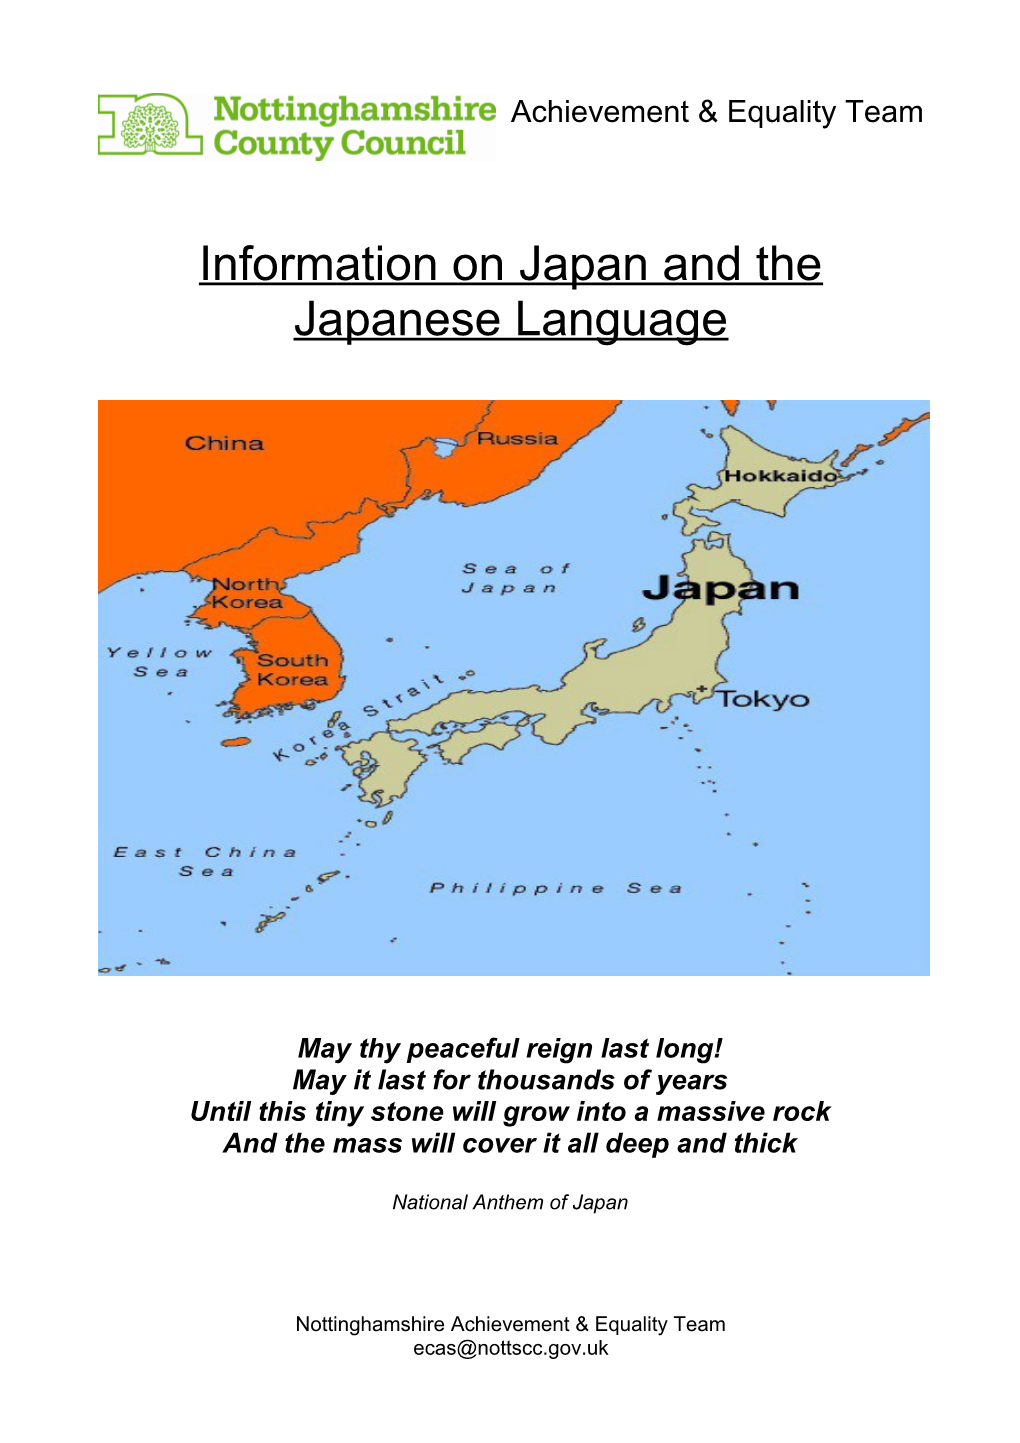 Information on Japan and the Japanese Language